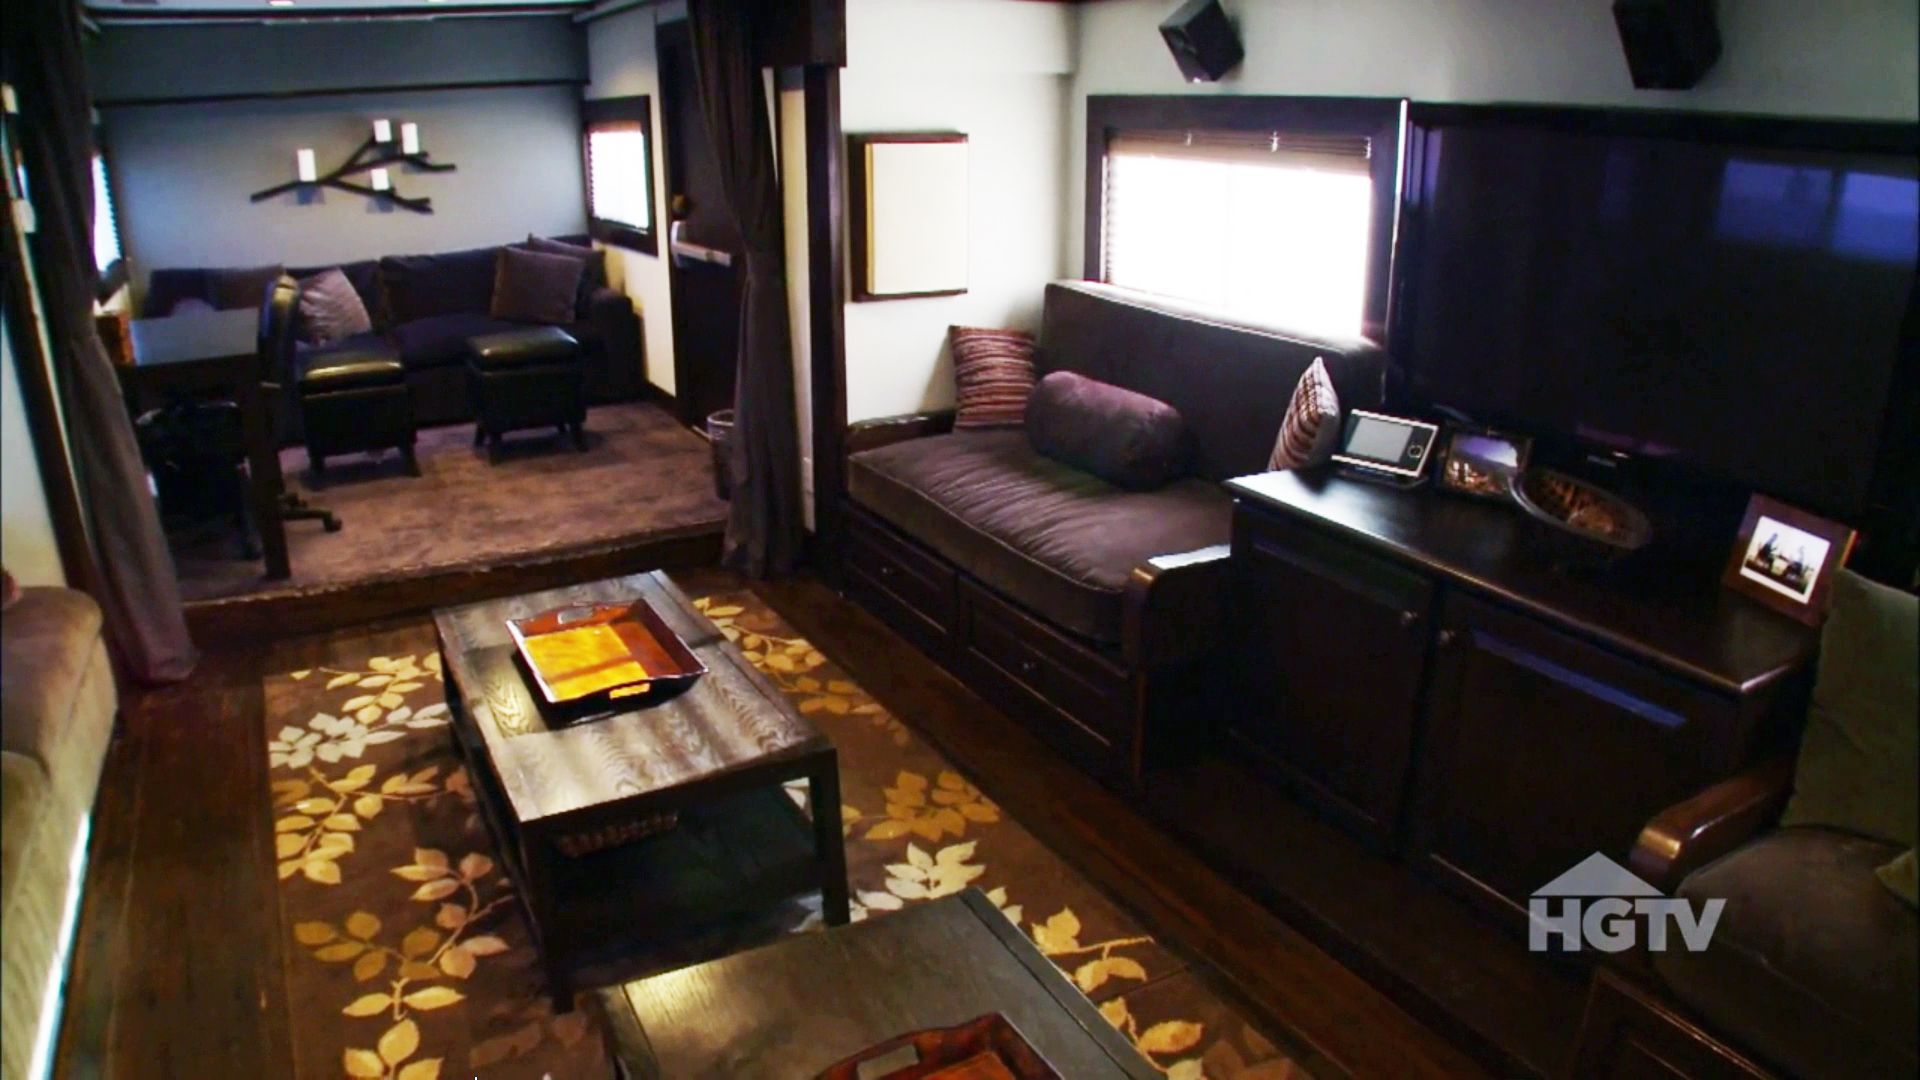 Vin Diesel Hangs Out In Style In His Motorhome While On Set